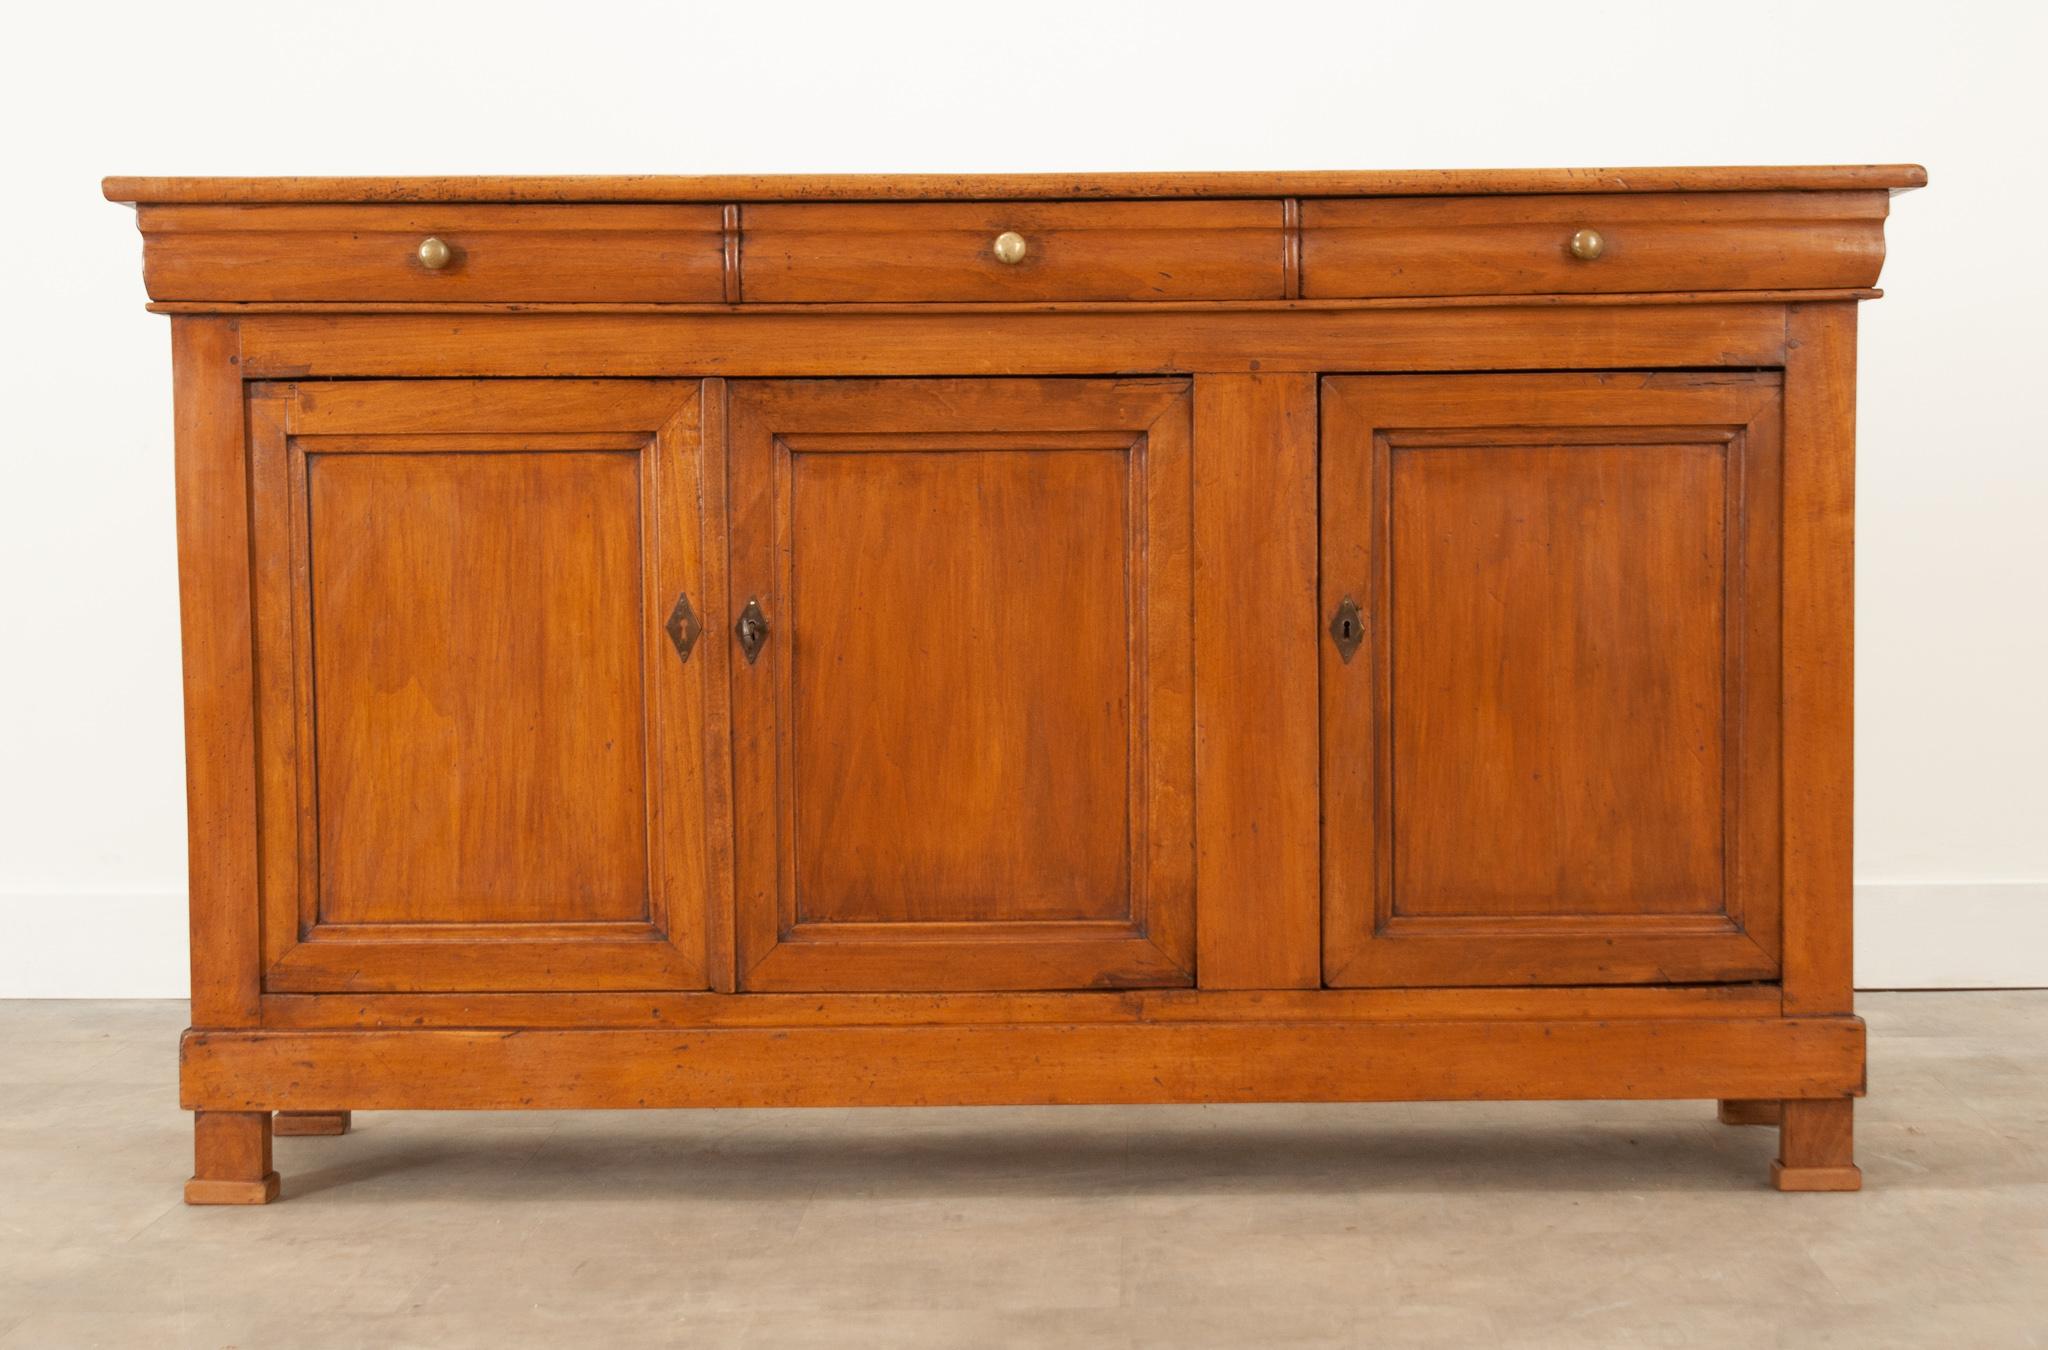 A fantastic fruitwood enfilade from 19th century France. The beautiful solid wood case antique has a linear composition with subtle curved details, indicative of the Louis Philippe style. Three shaped-front drawers are housed within the apron and